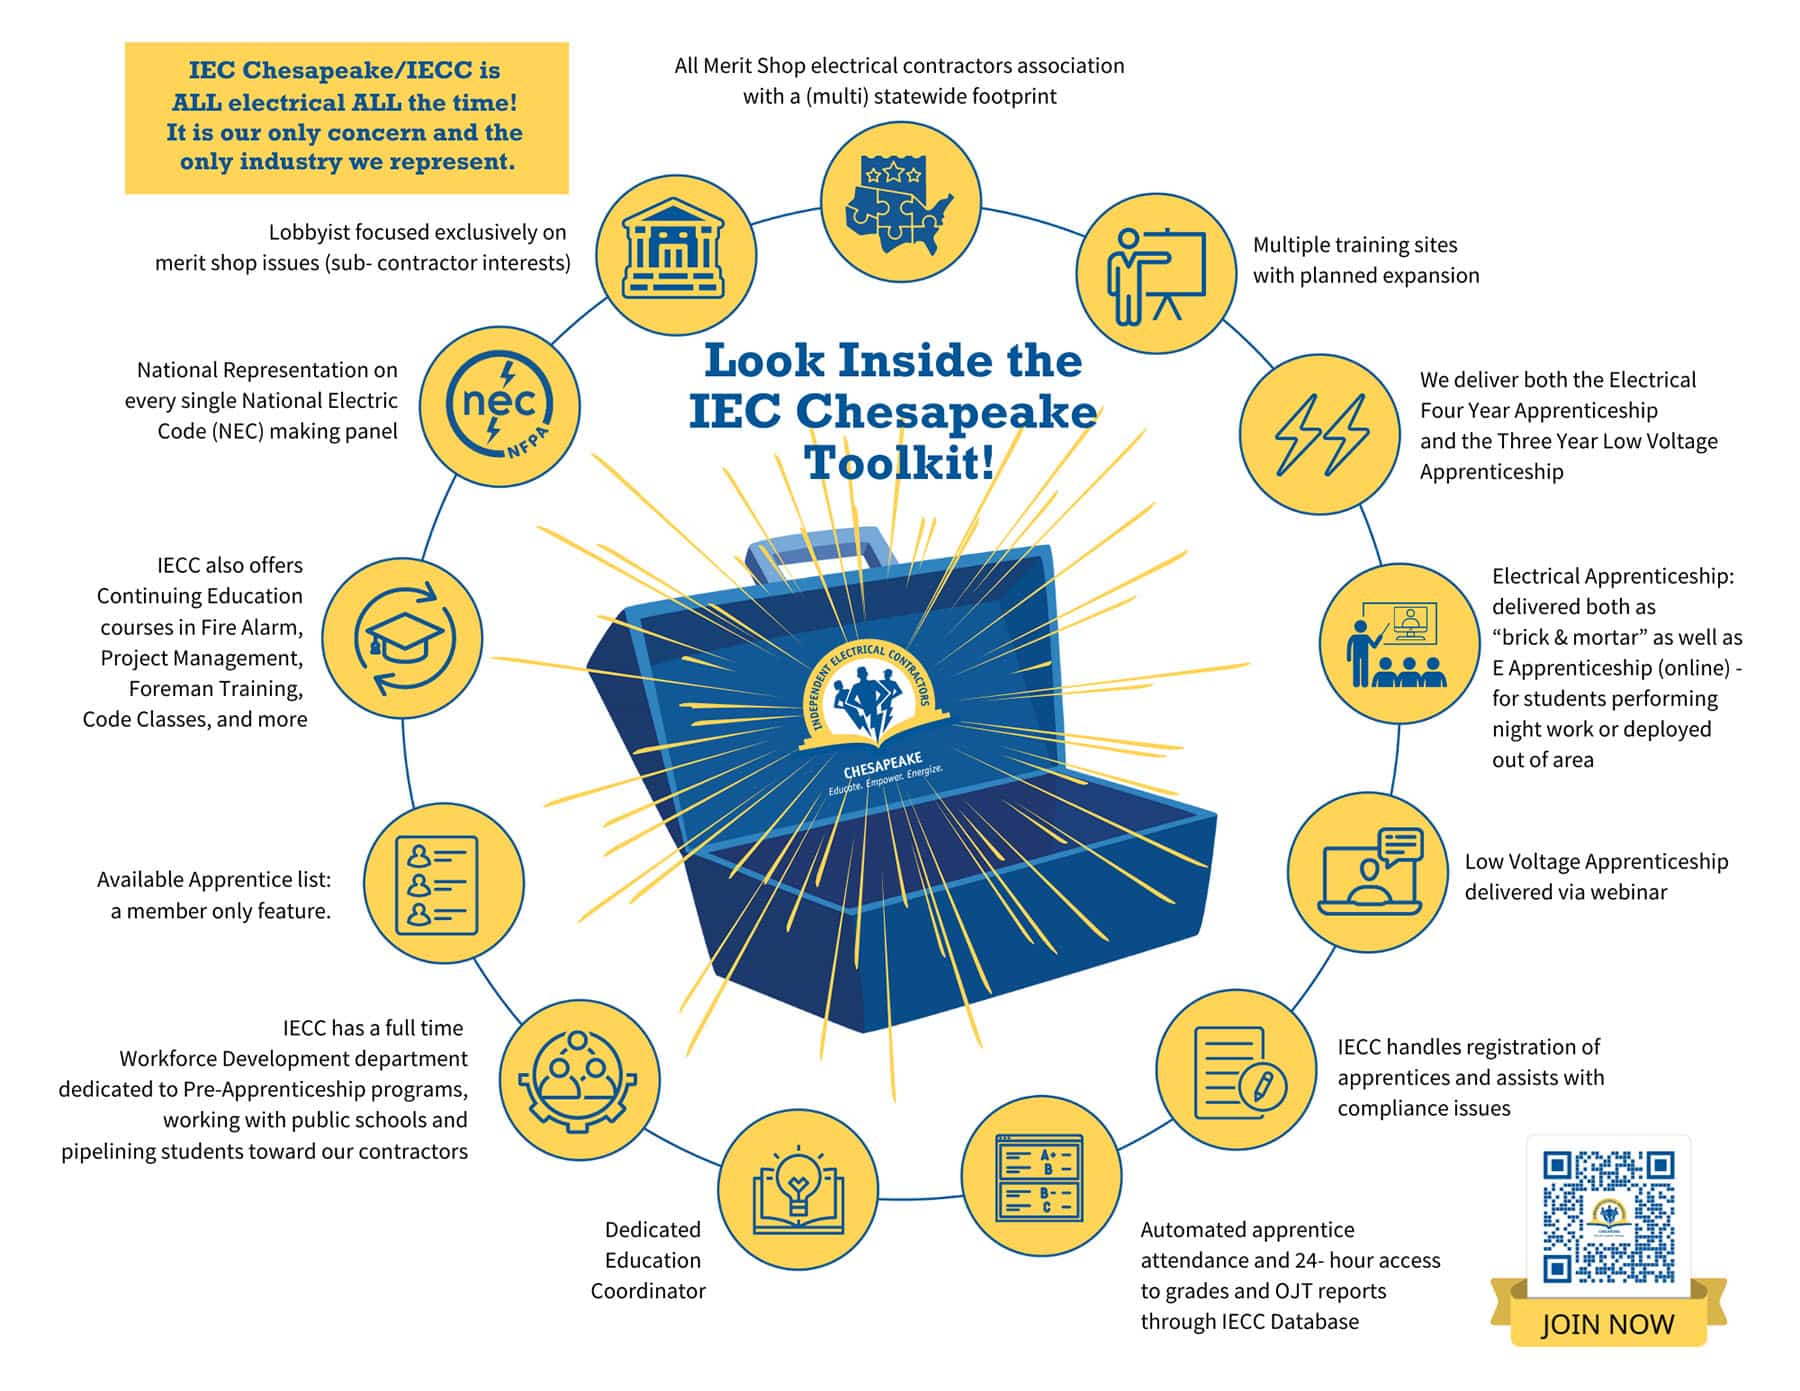 Advantages of Joining IECC